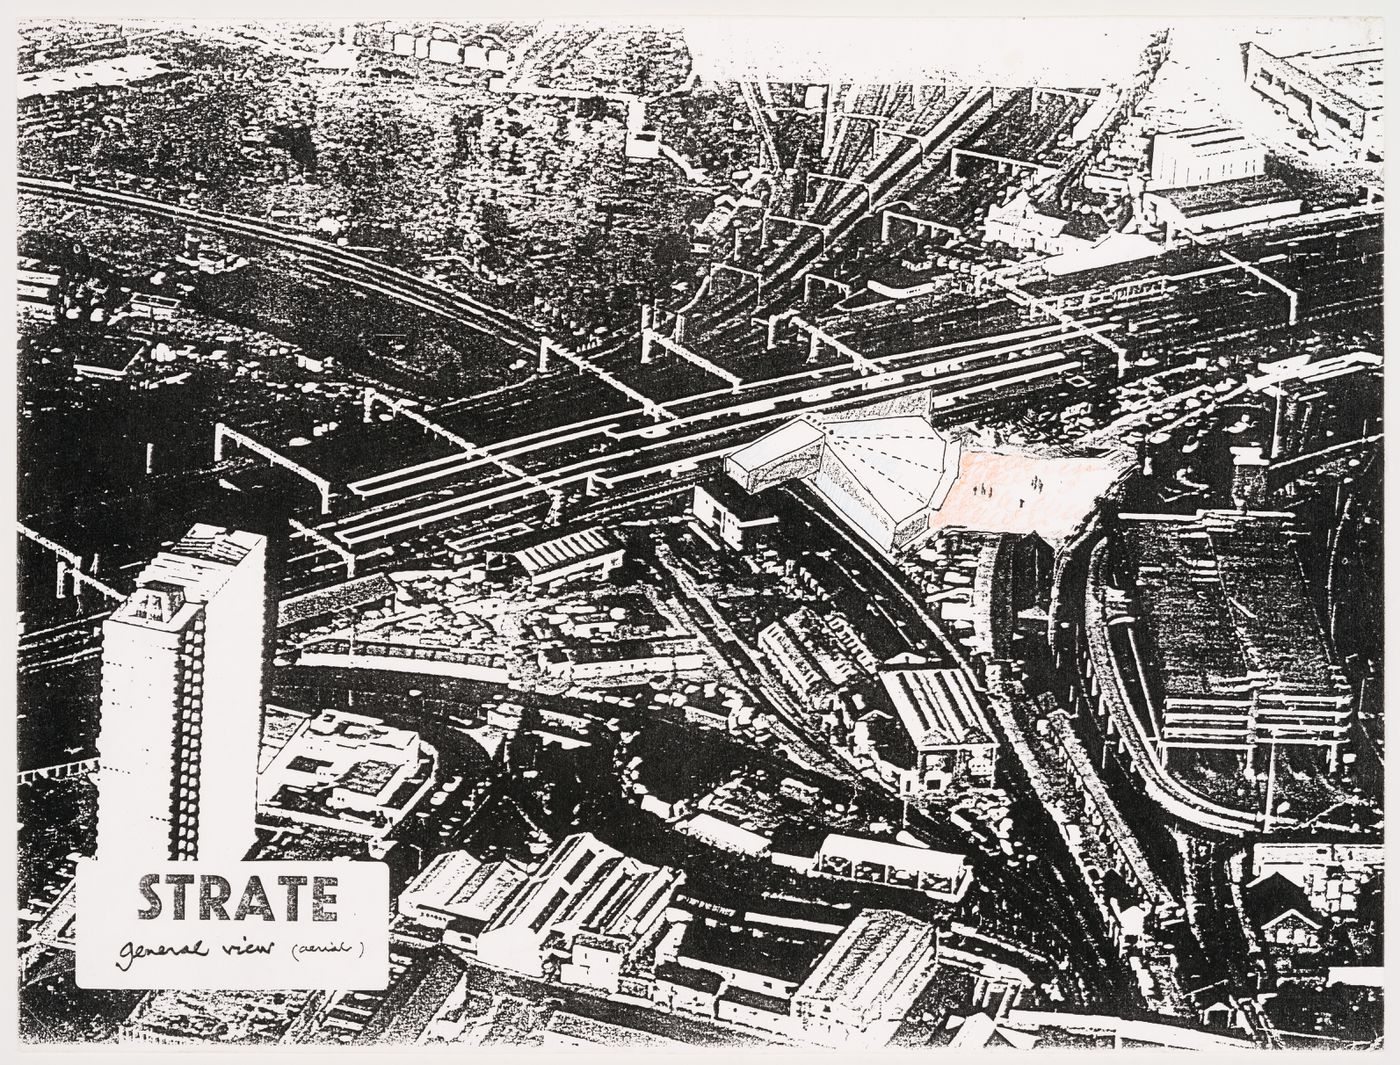 Strate: general view (aerial)